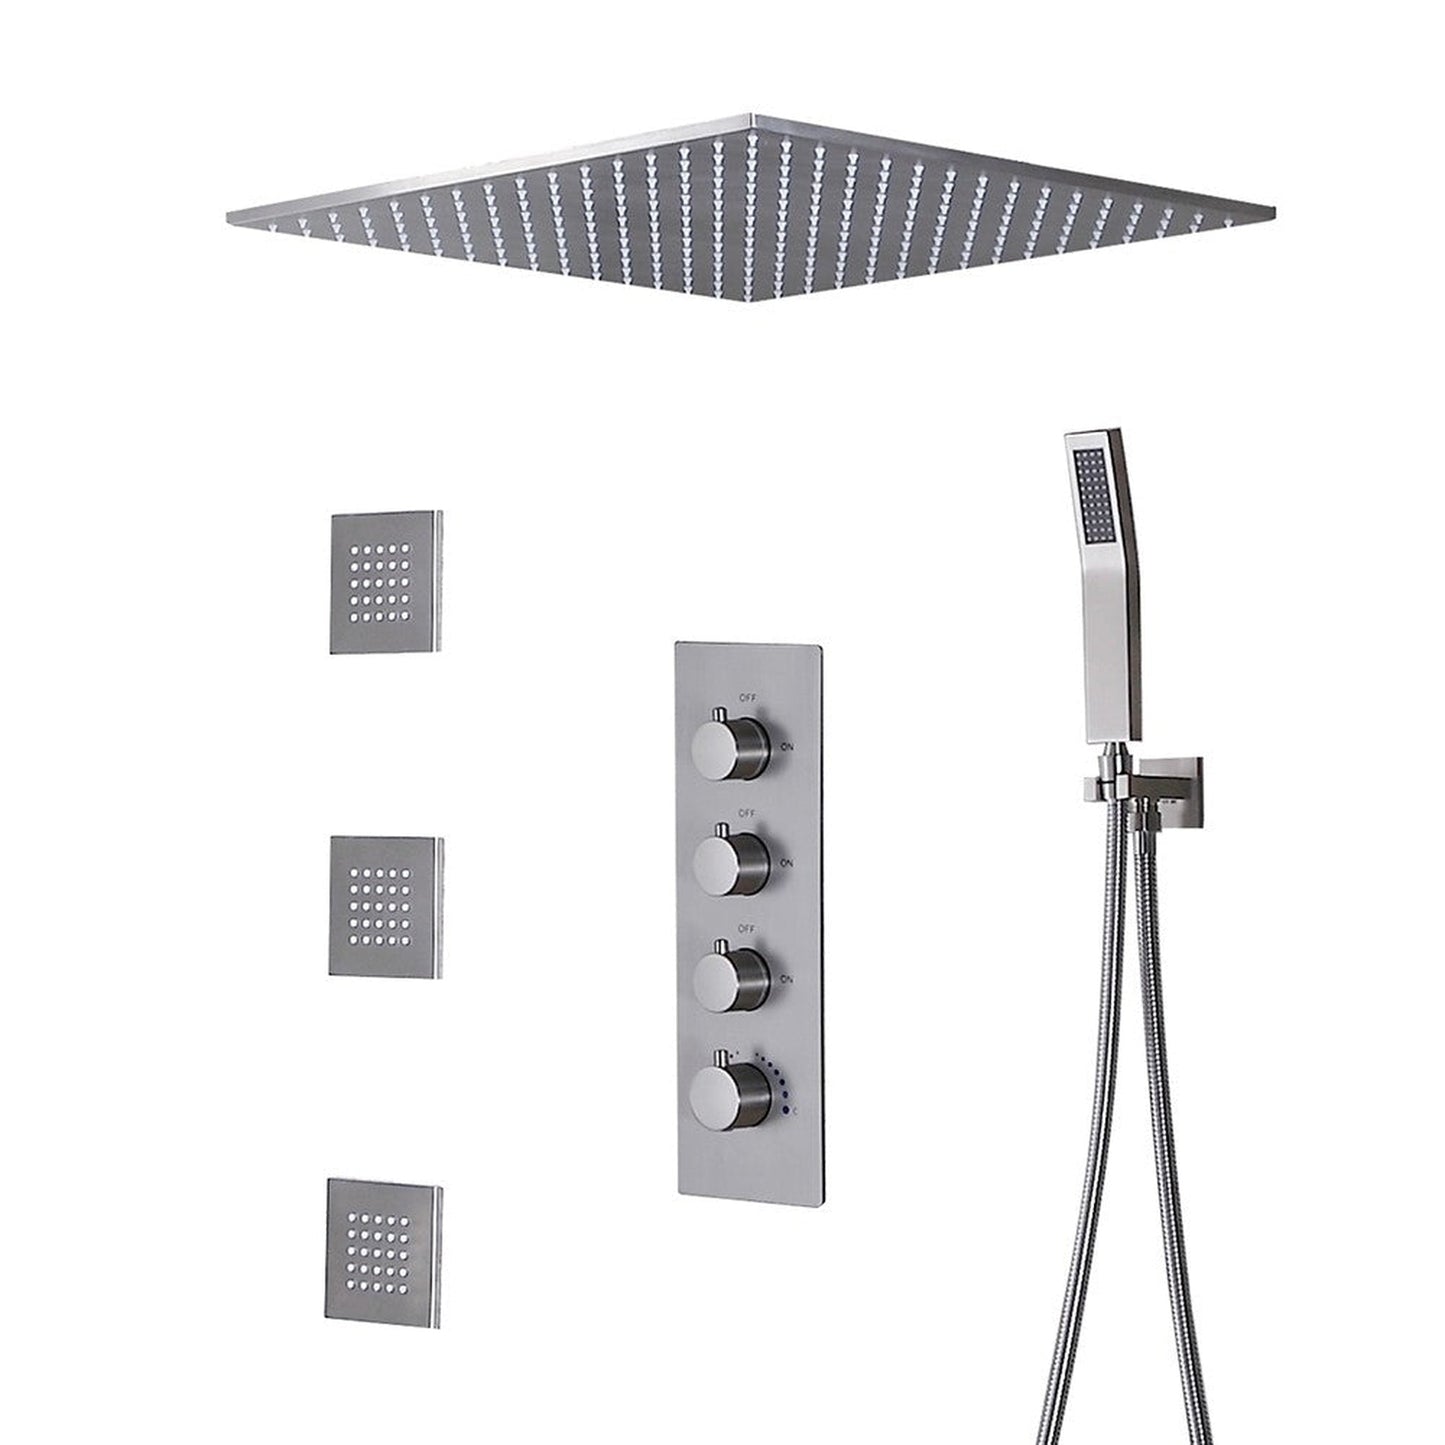 Fontana 20" x 20" Brushed Nickel Ceiling Mounted Thermostatic Valve Shower System With 3-Jet Sprays, Hand Shower and Water Powered LED Lights